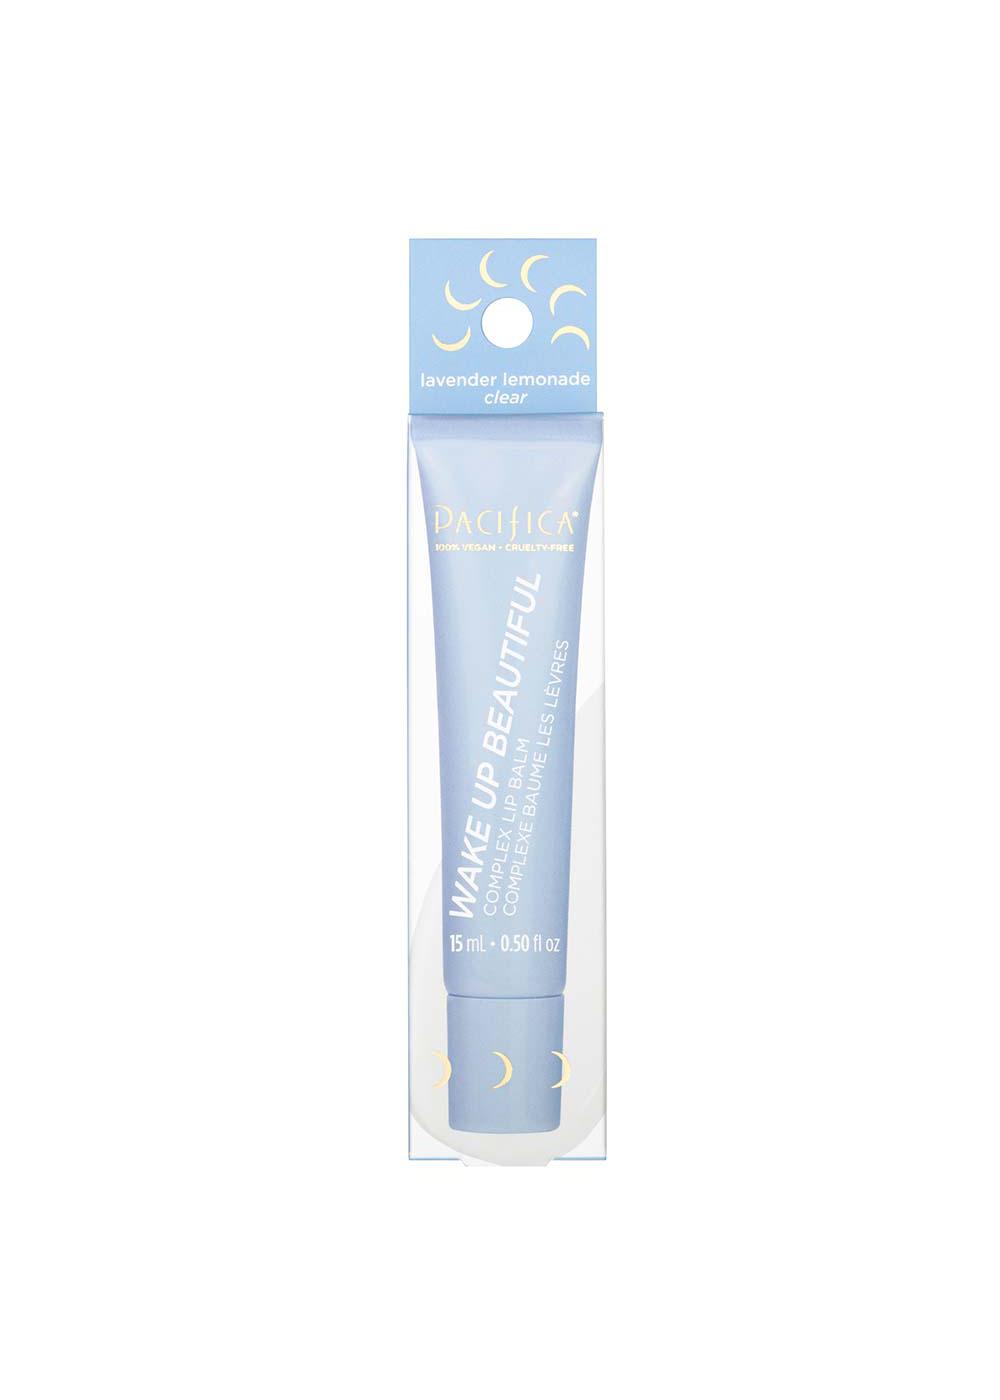 Pacifica Wake Up Beautiful Complex Lip Balm; image 1 of 5